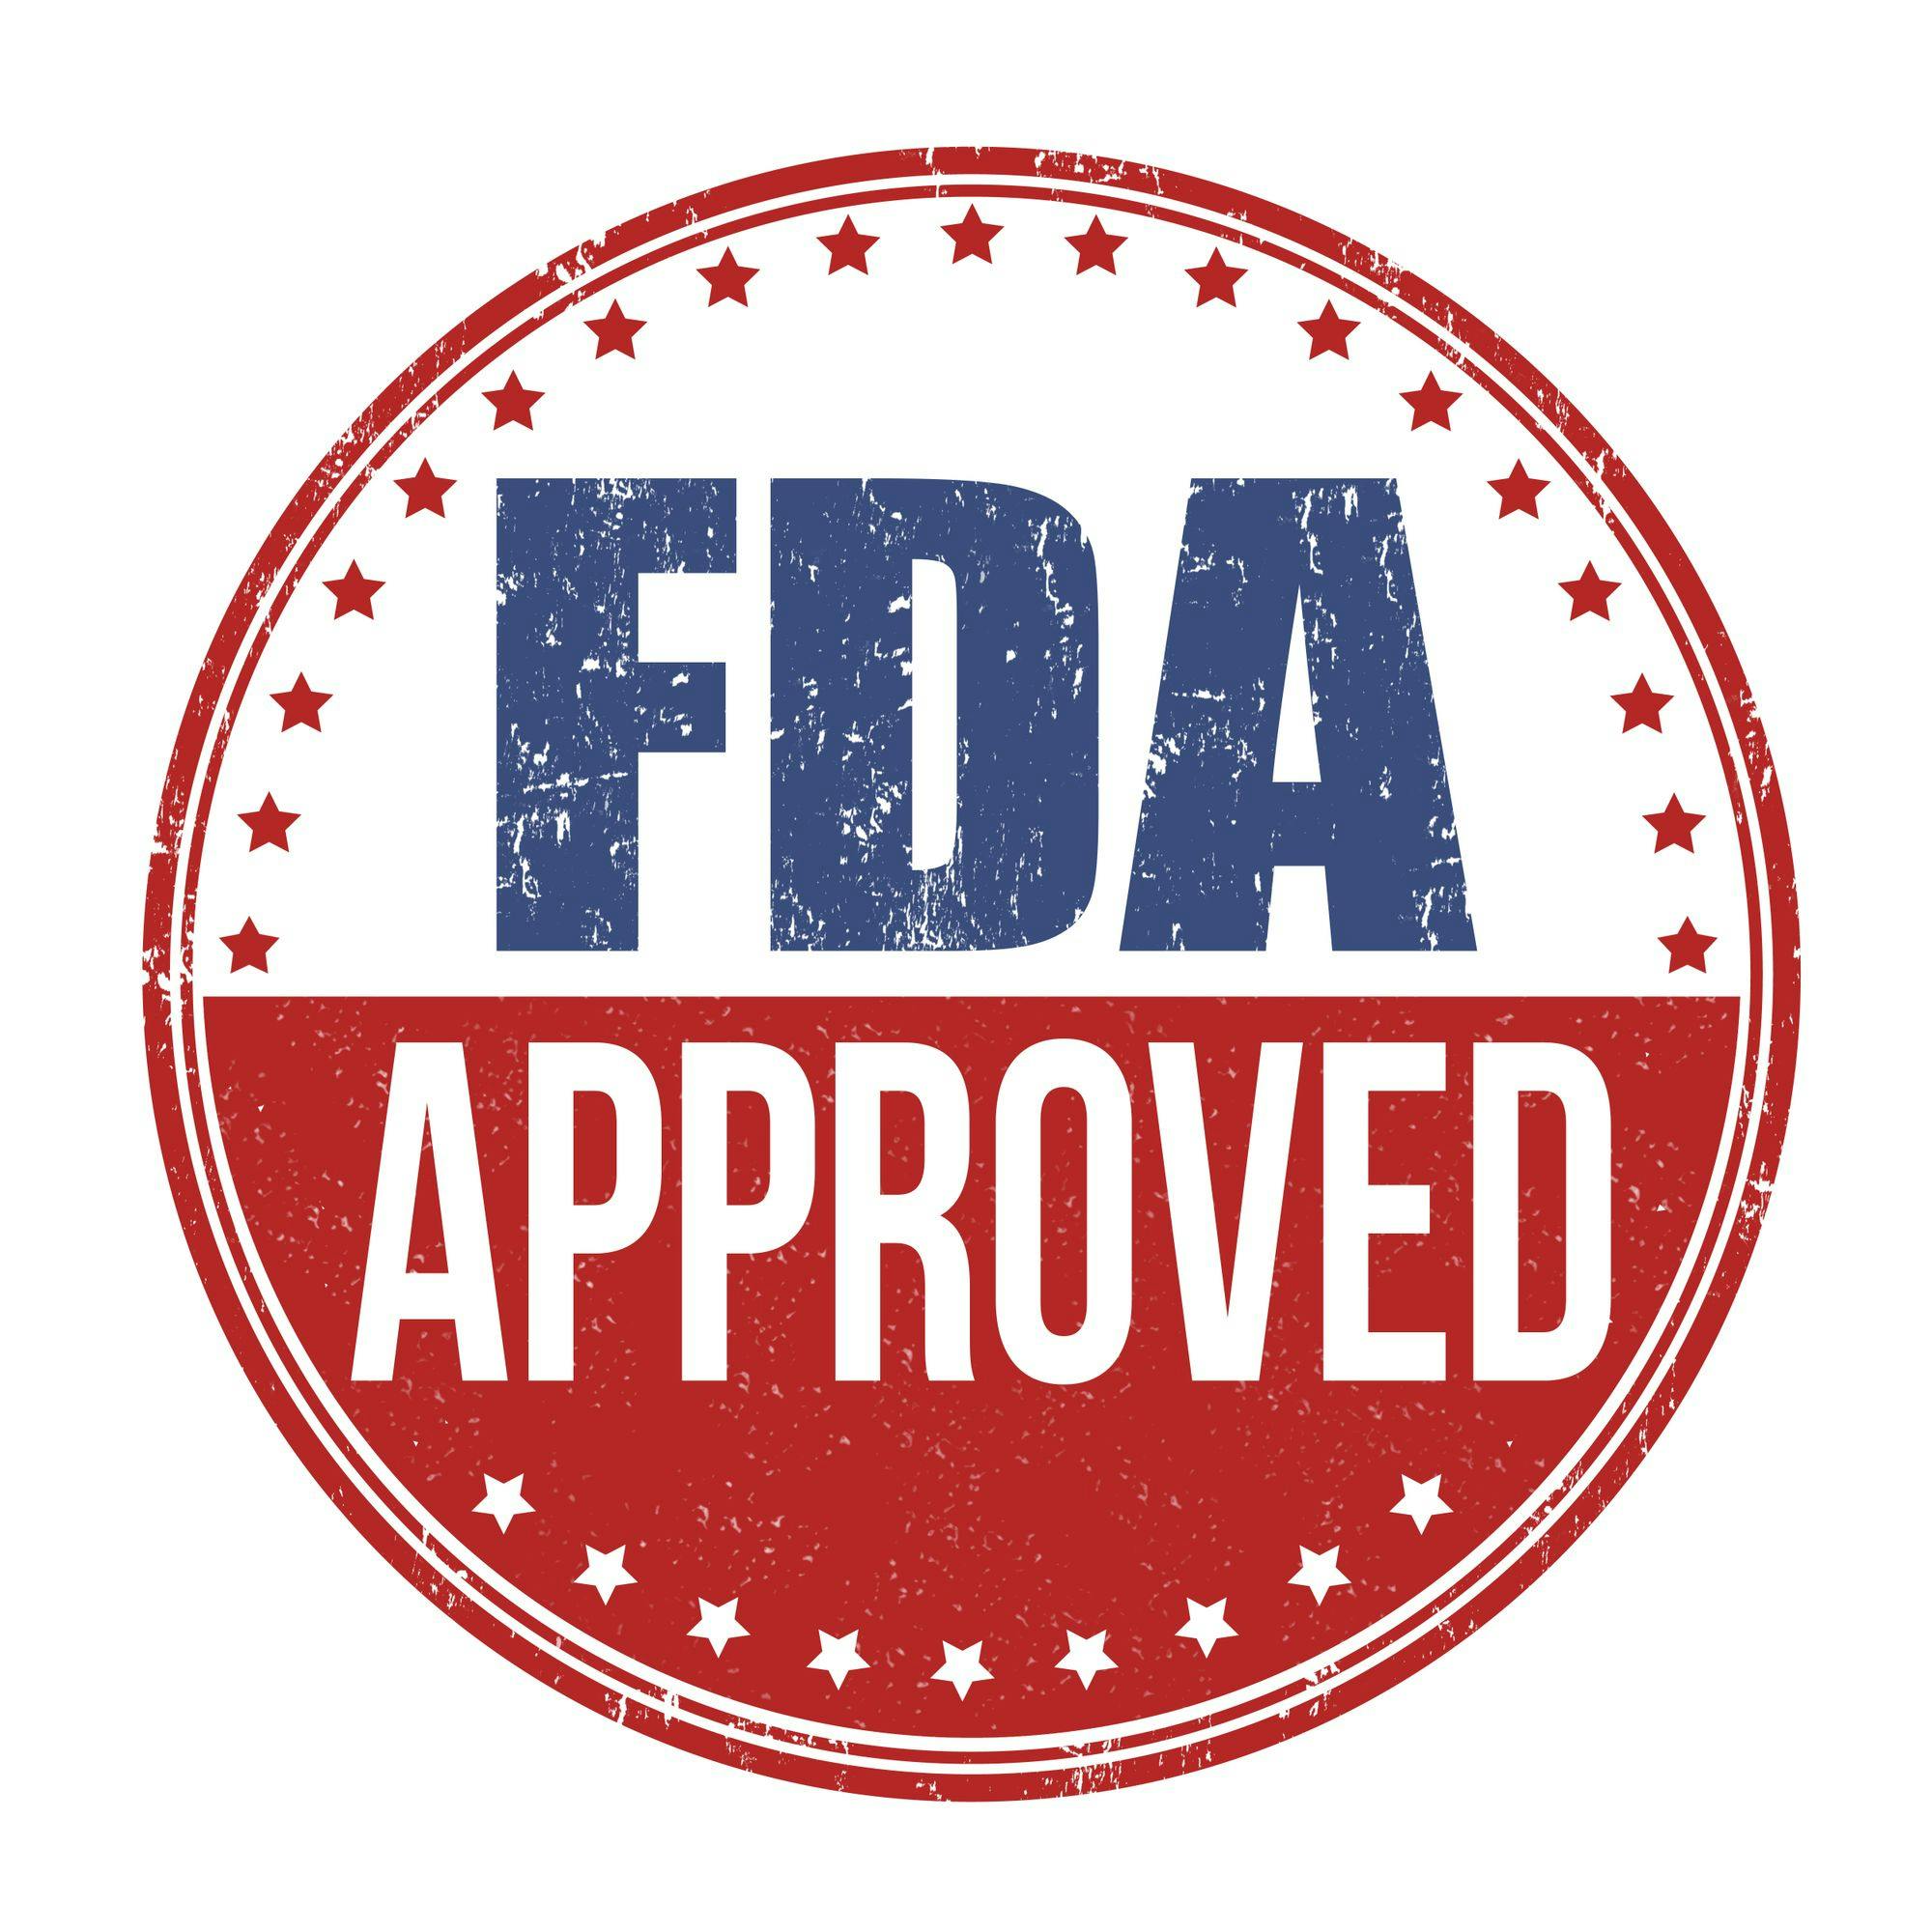 FDA Approves Exagamglogene Autotemcel, First CRISPR Gene-Editing Therapy for SCD